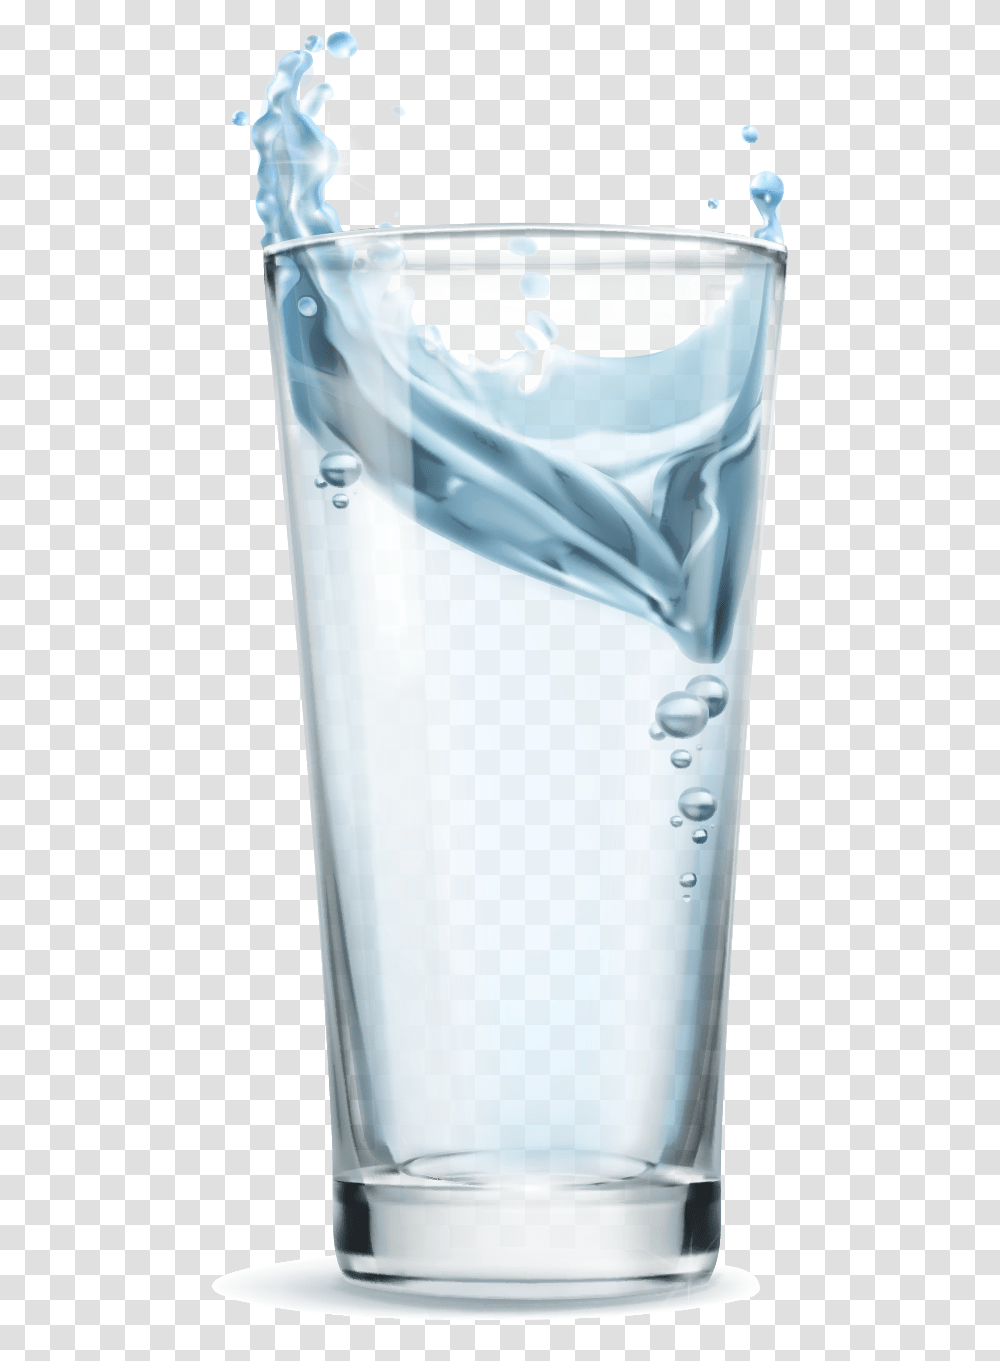 A Glass Of Water Vector Material Download 8911801 Still Life Photography, Bottle, Beverage, Drink, Shaker Transparent Png